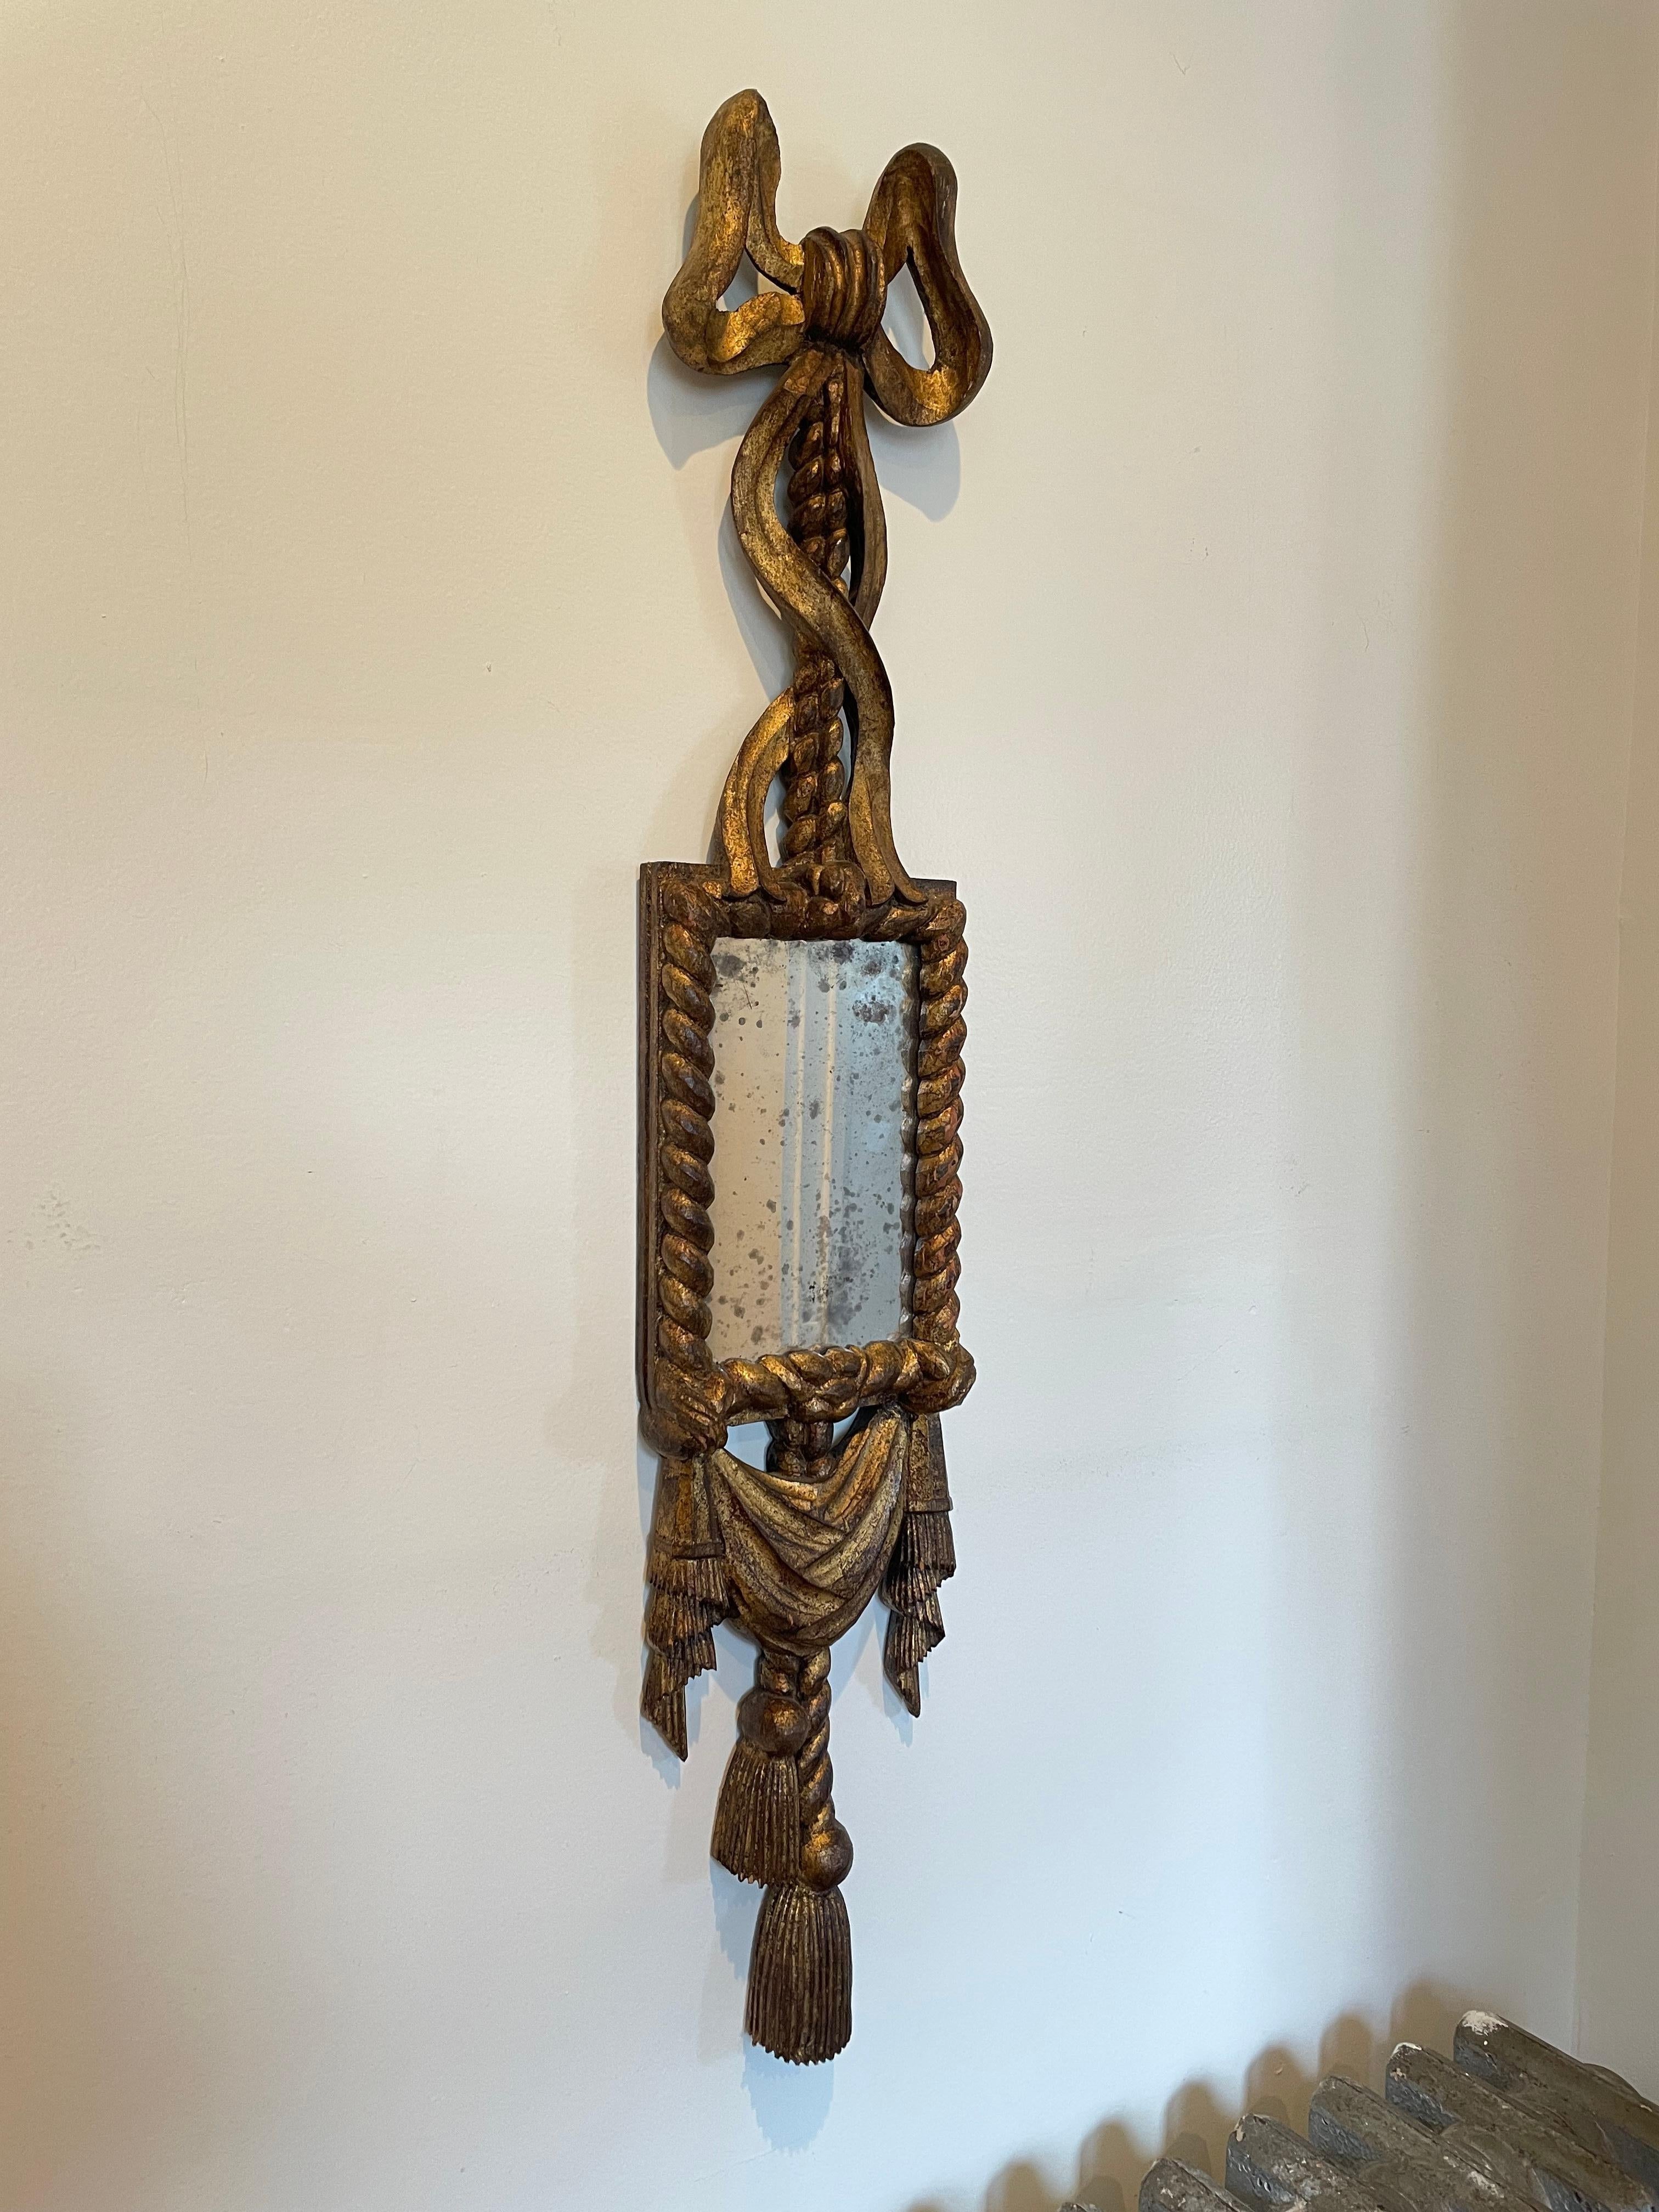 Beautiful detail in this giltwood mirror with ribbon, rope and drape detail. Nicely antiqued mirror surface. Marked Spain.